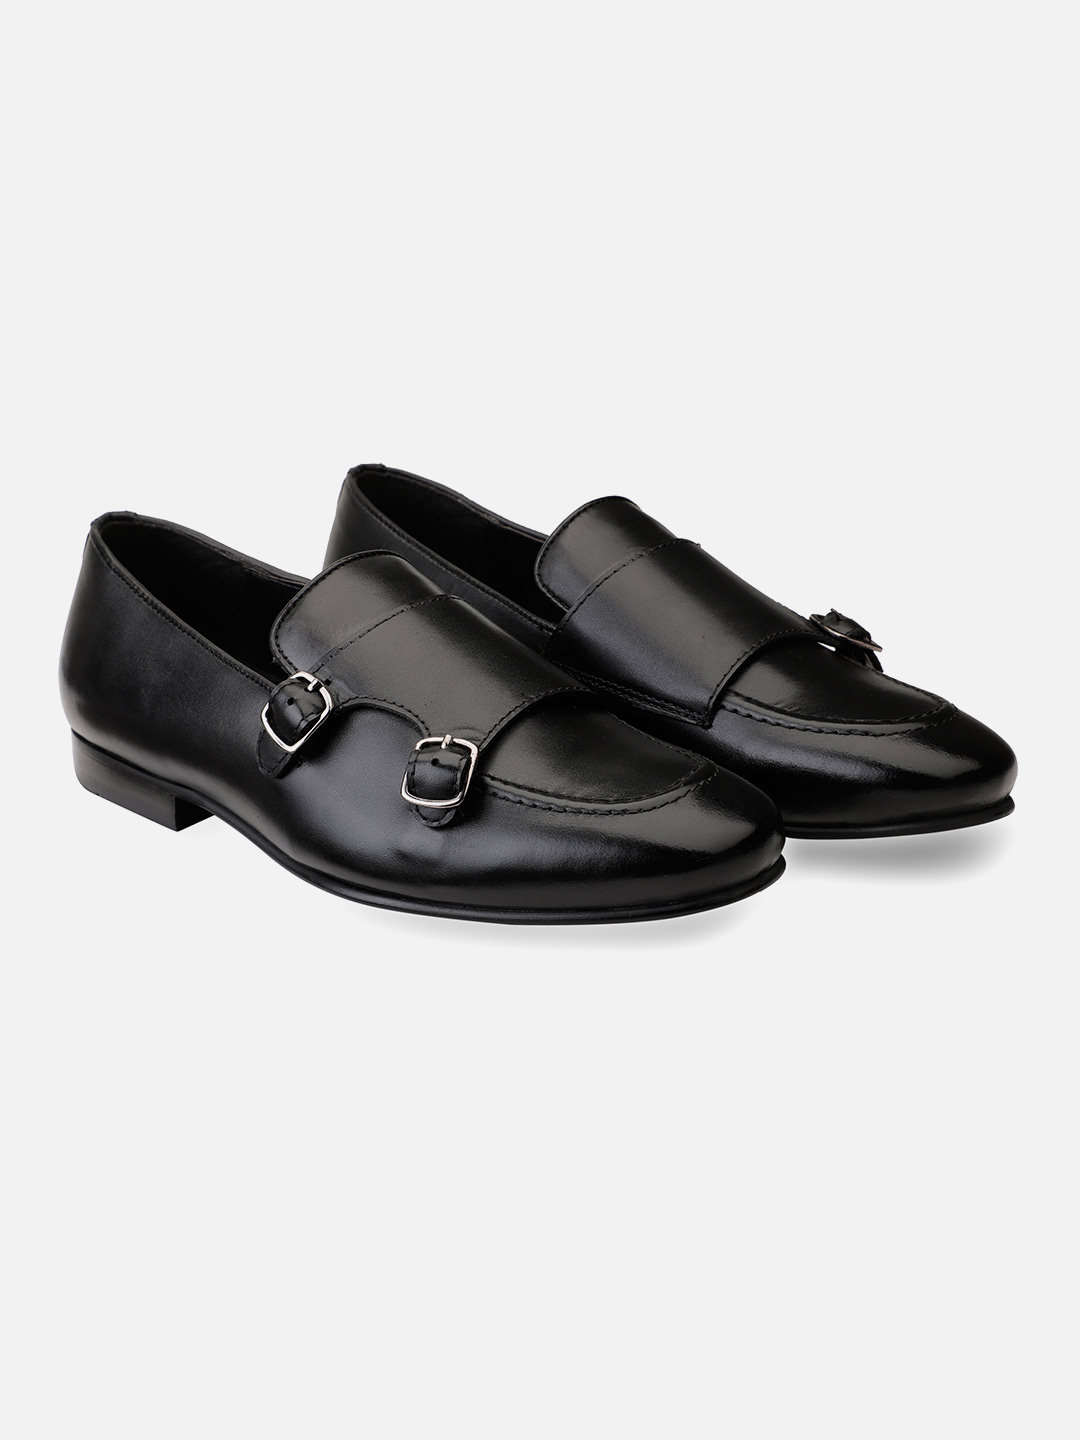 Buy New Arrivals Handcrafted Leather Shoes for Men | Hats Off Accessories